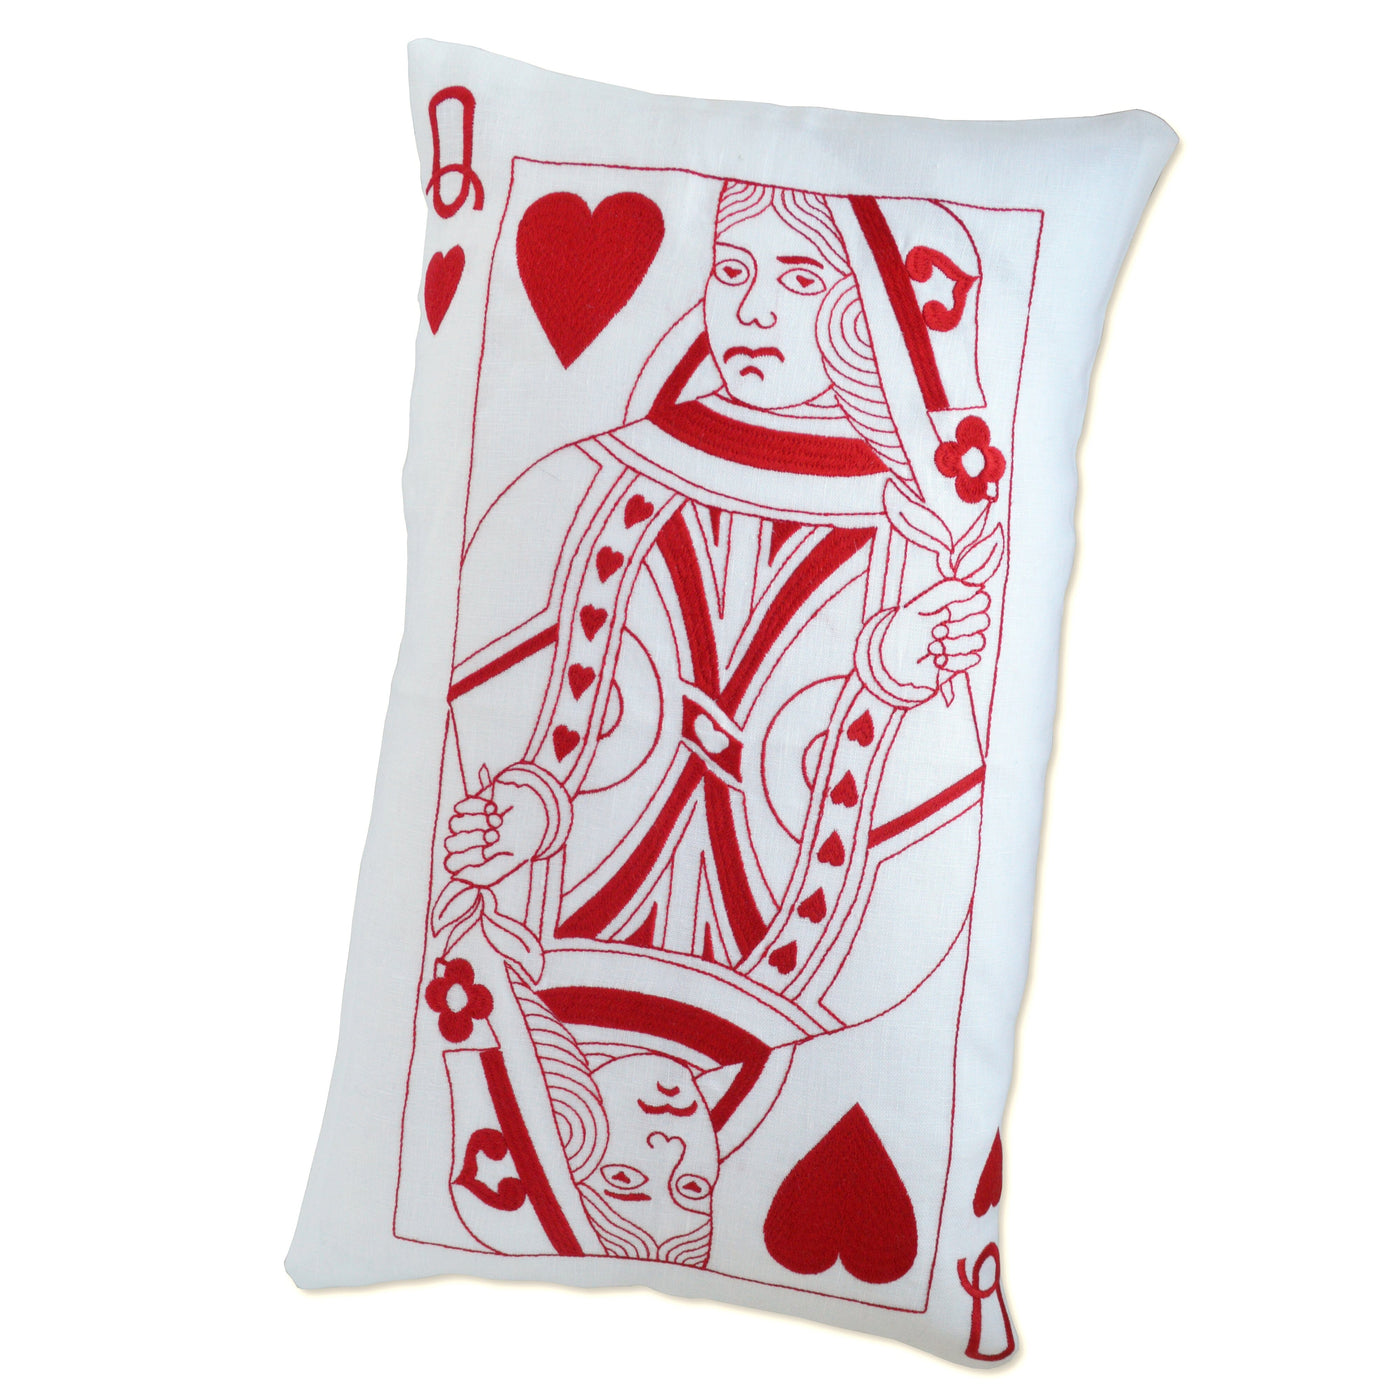 Queen of Hearts Pillowcase red bow Chefanie 